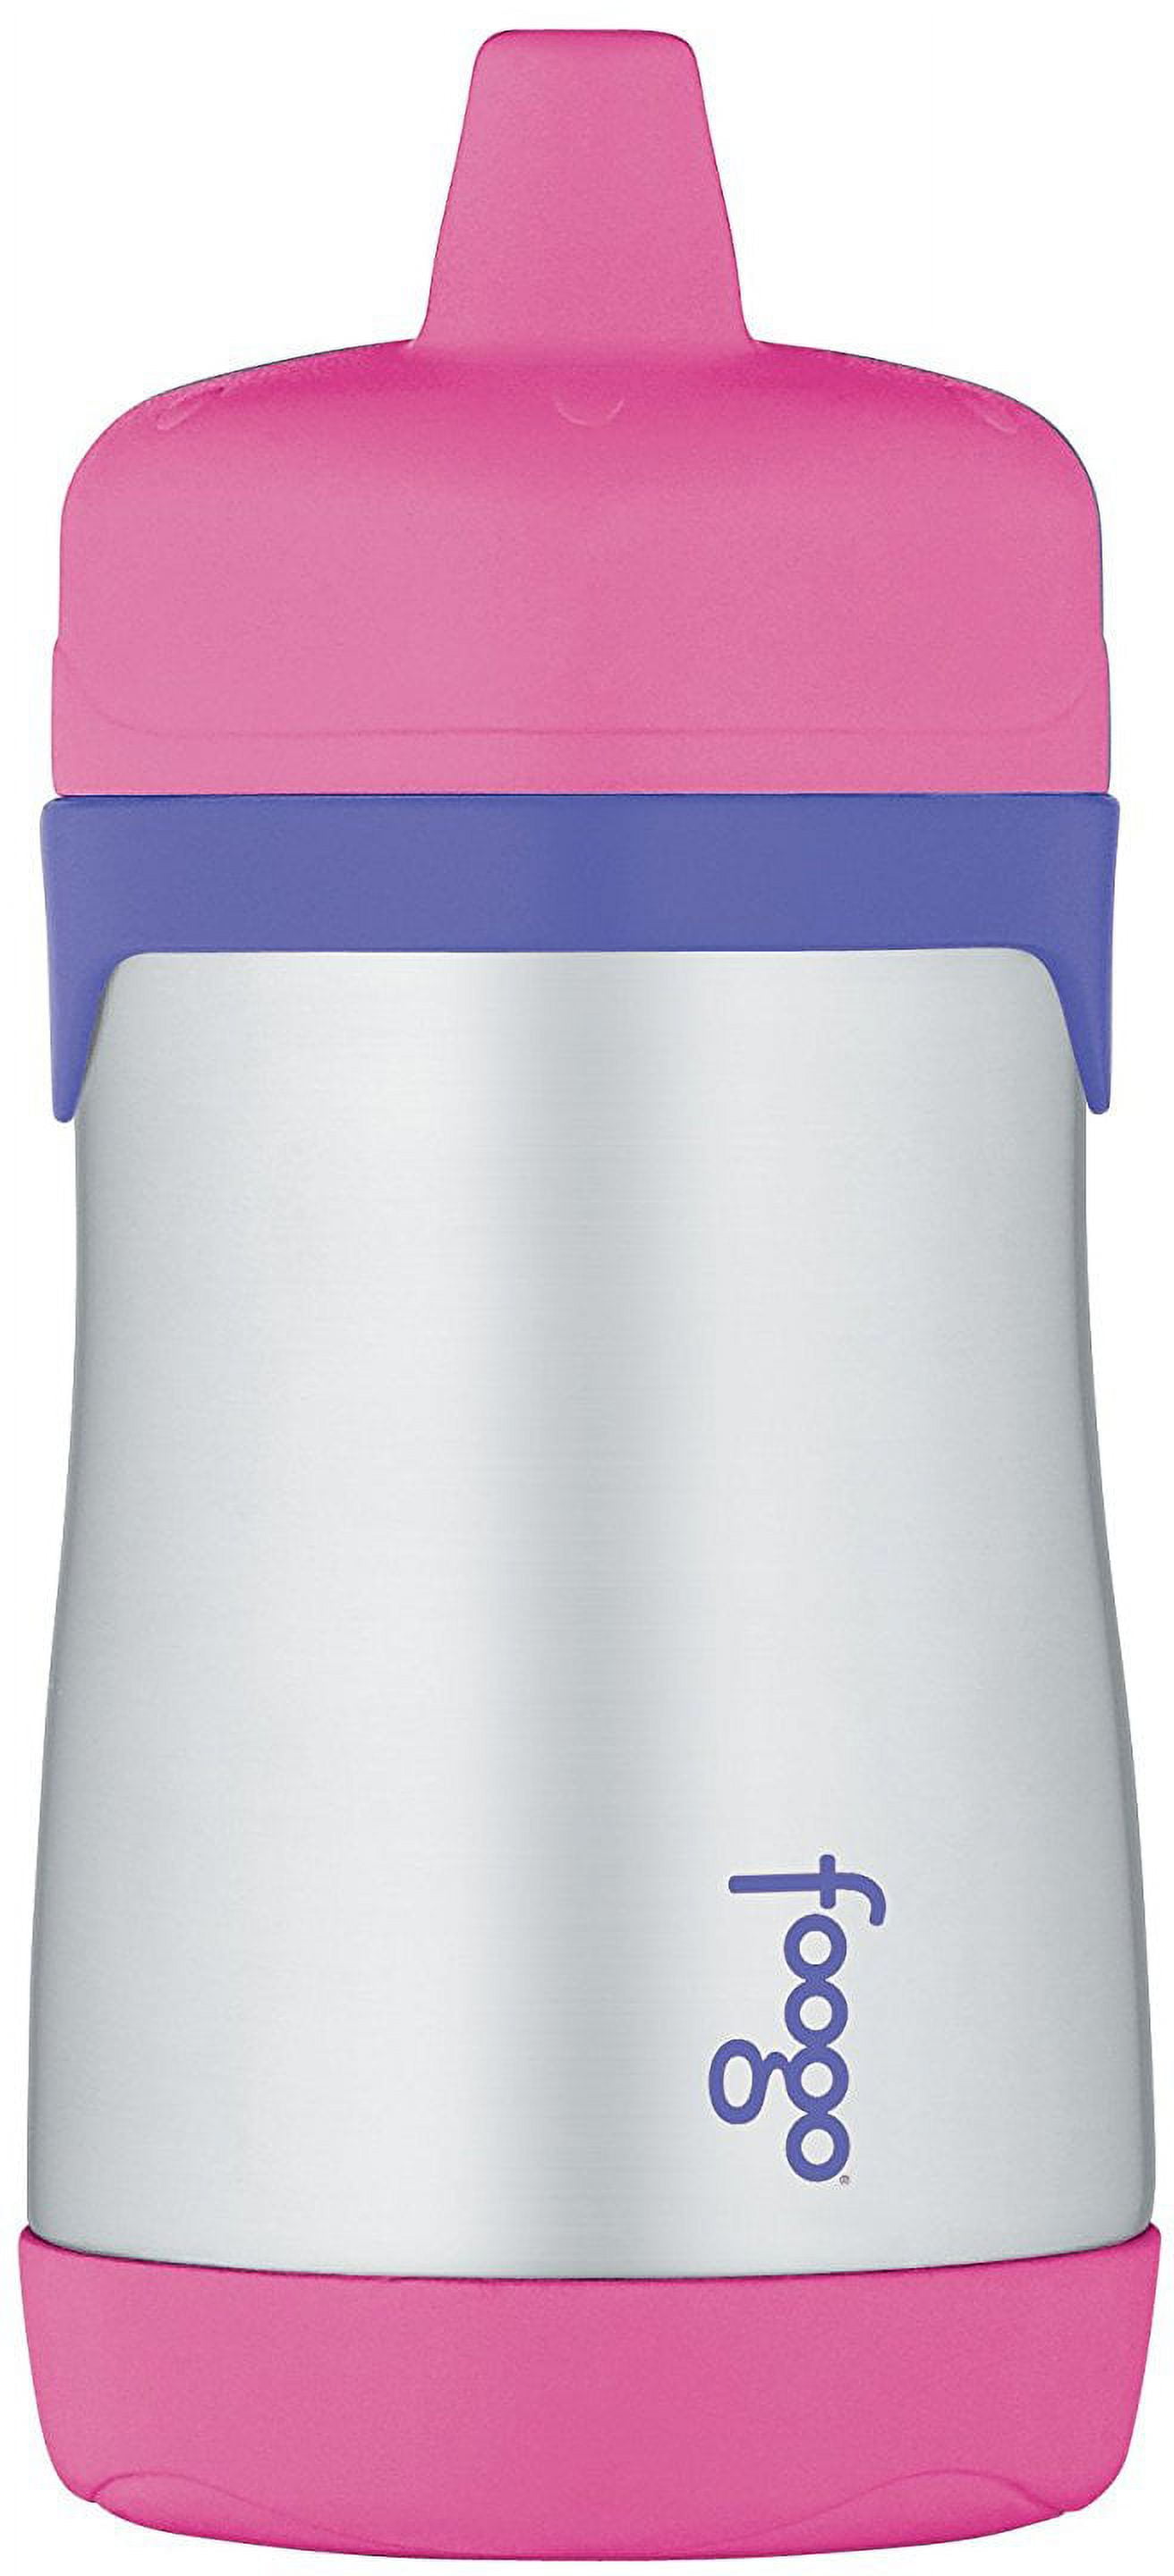 Gtmileo Daddys and Mommys Sippy Cup Stainless Steel Insulated